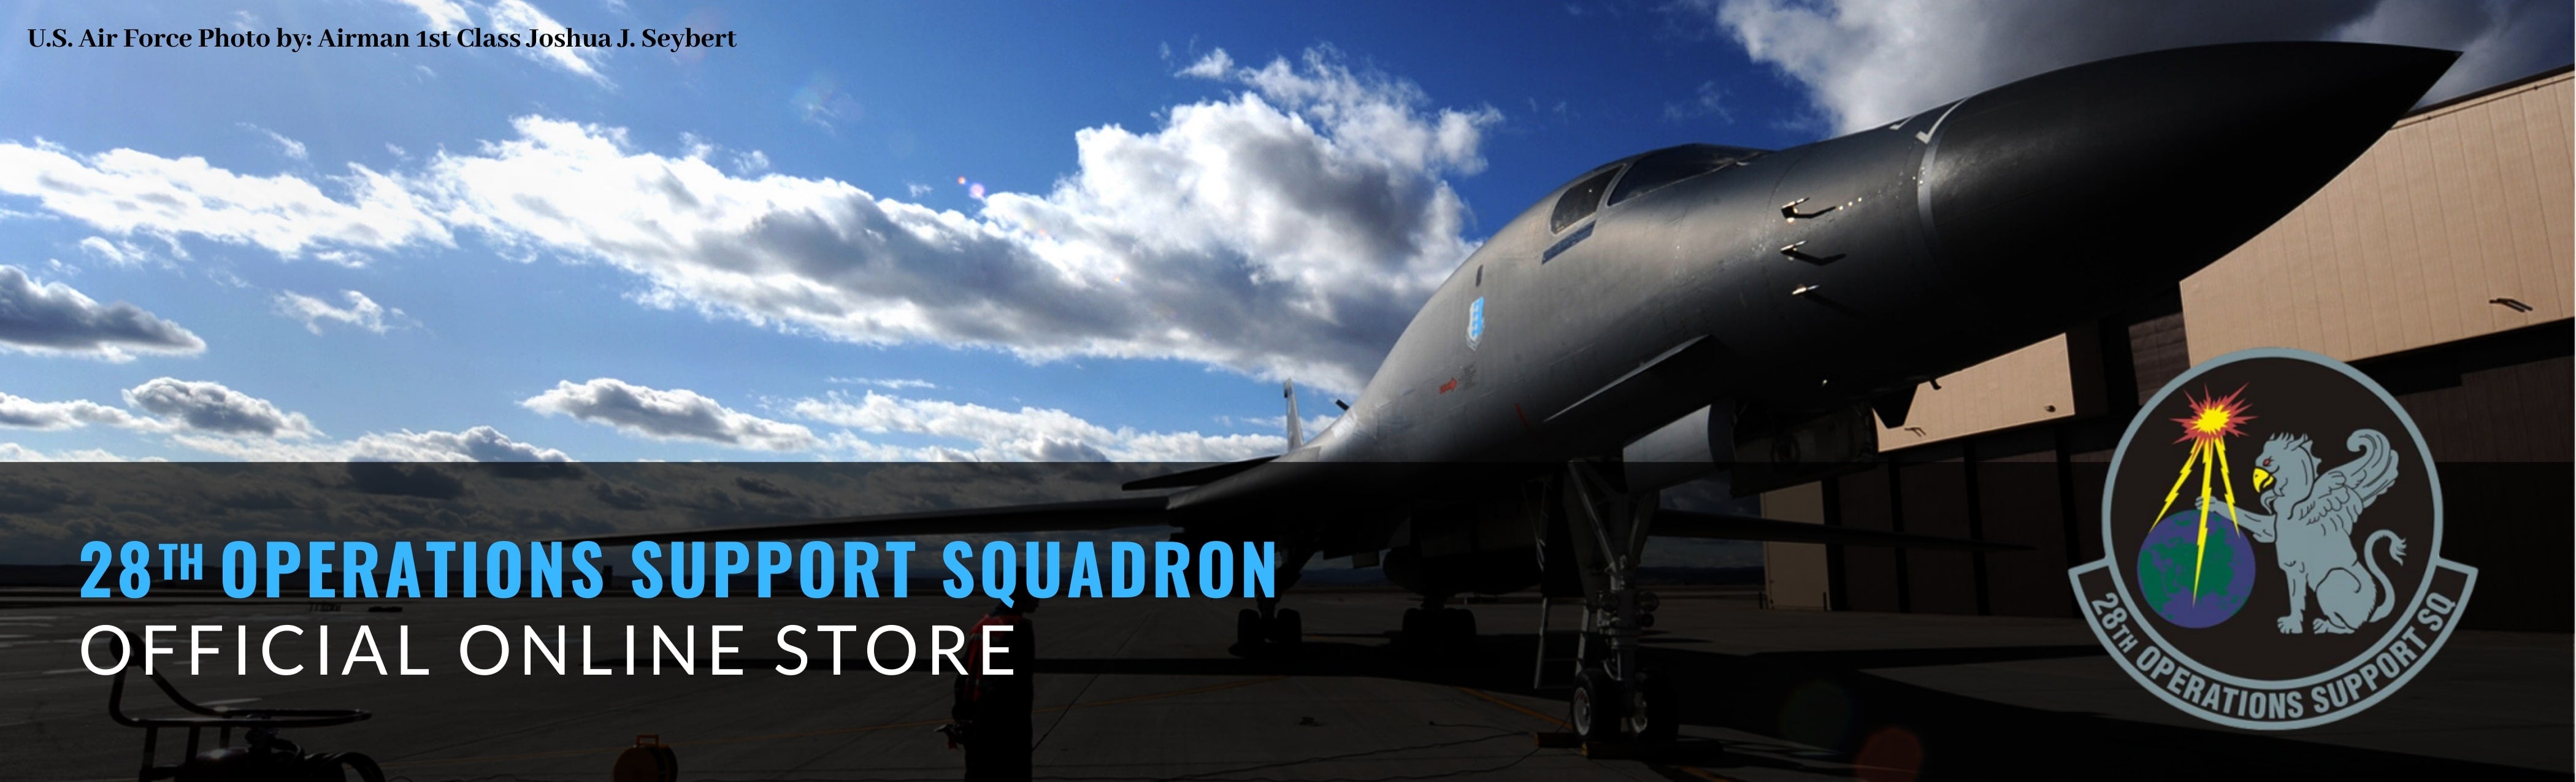 28th Operations Support Squadron